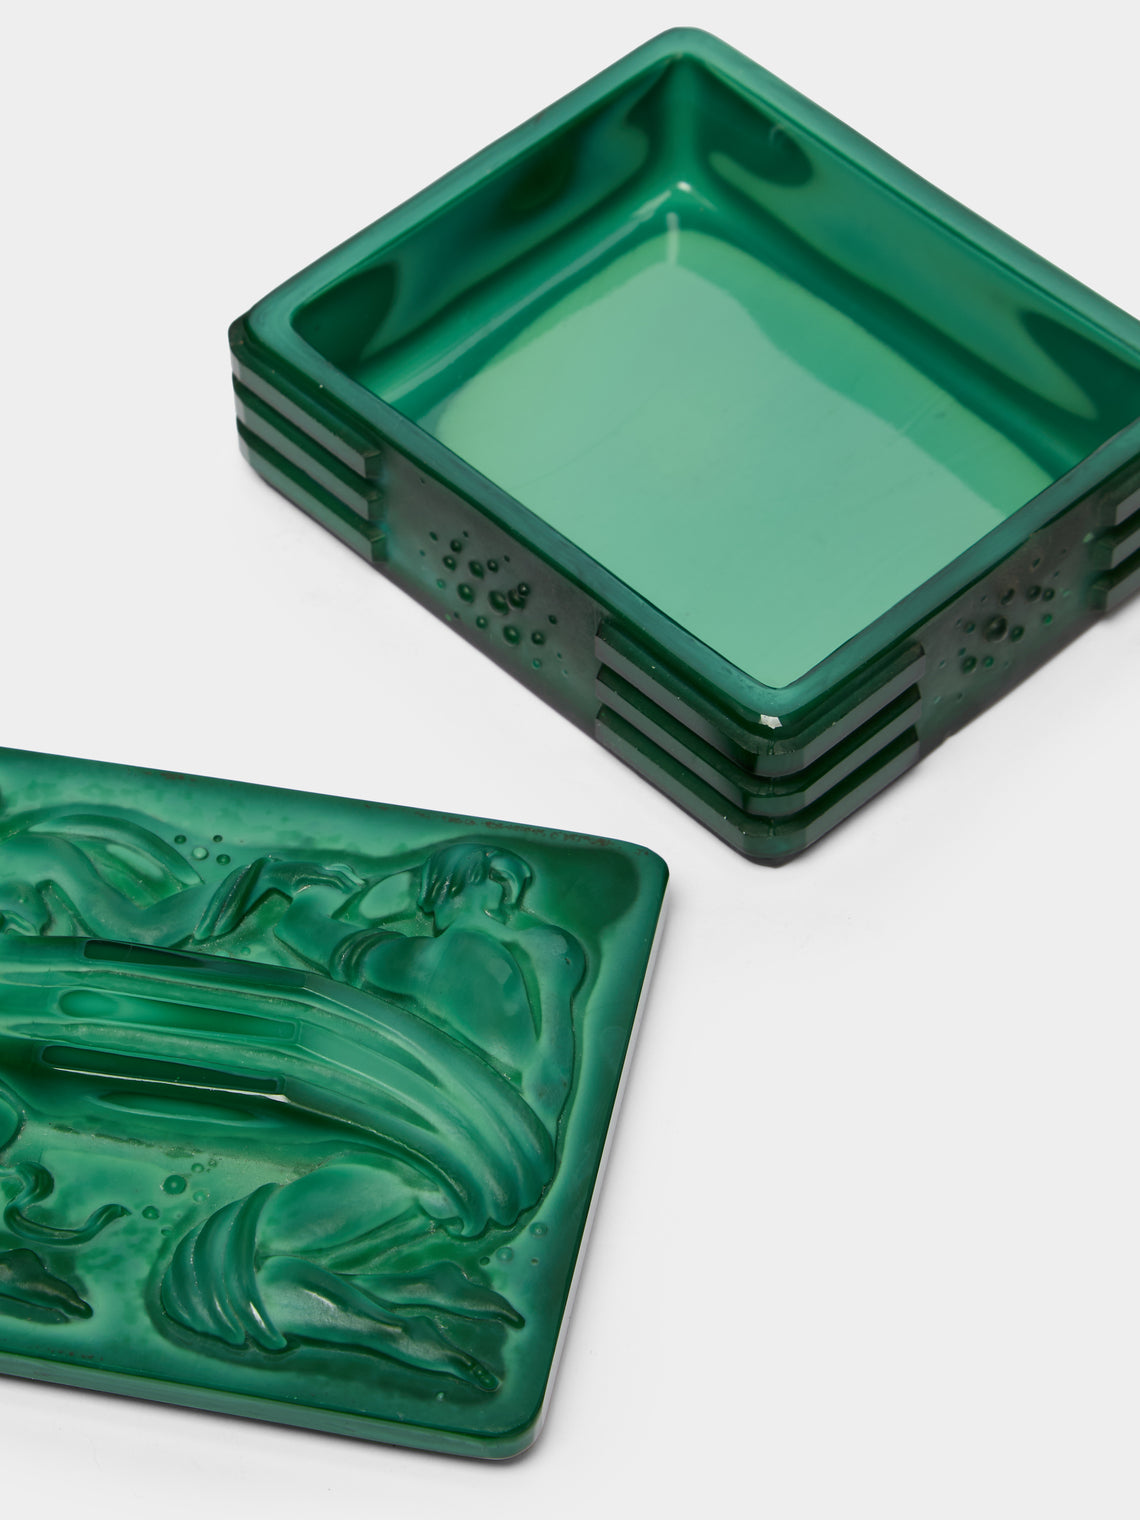 Antique and Vintage - 1930s Malachite Glass Box -  - ABASK